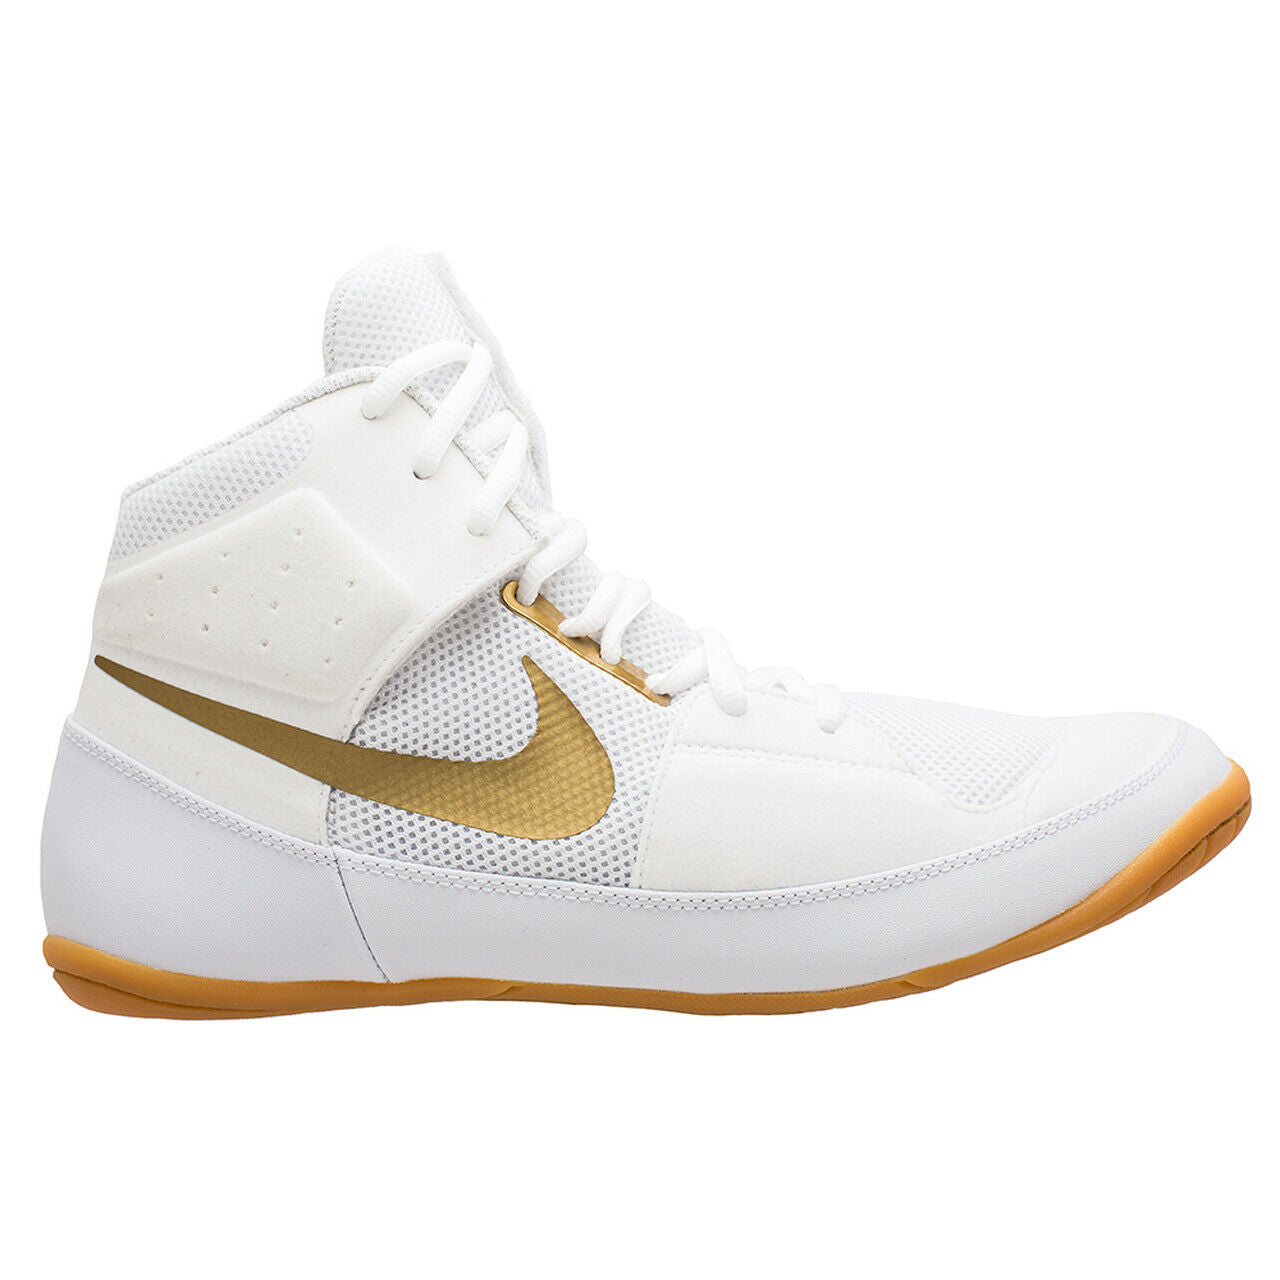 Chaussures de lutte Nike Fury - Blanc/Or